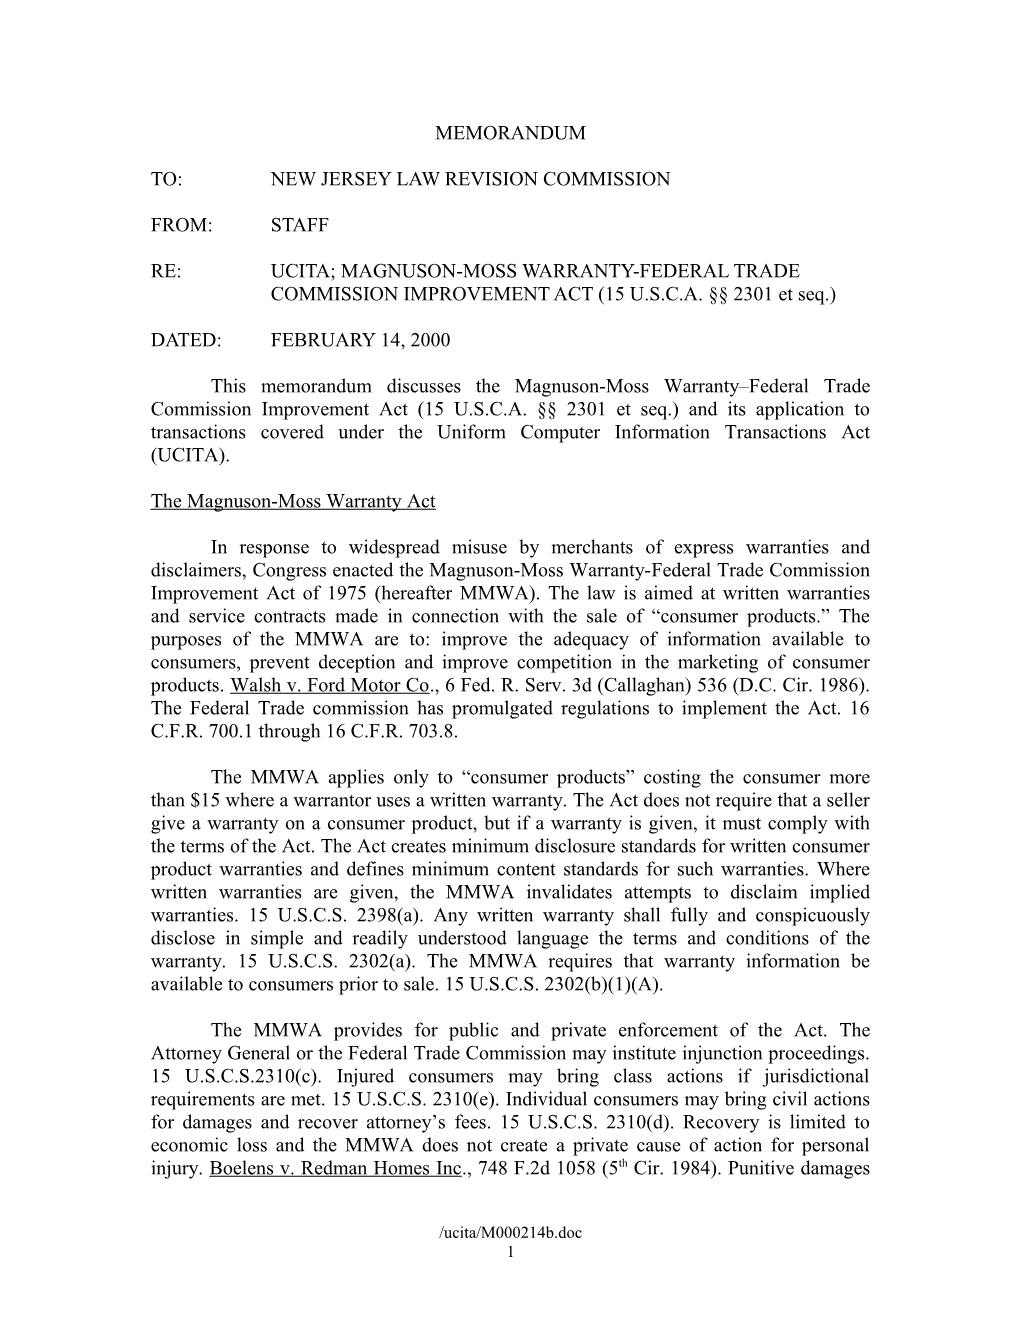 This Memorandum Discusses the Application of the Magnuson-Moss Warranty Federal Trade Commission